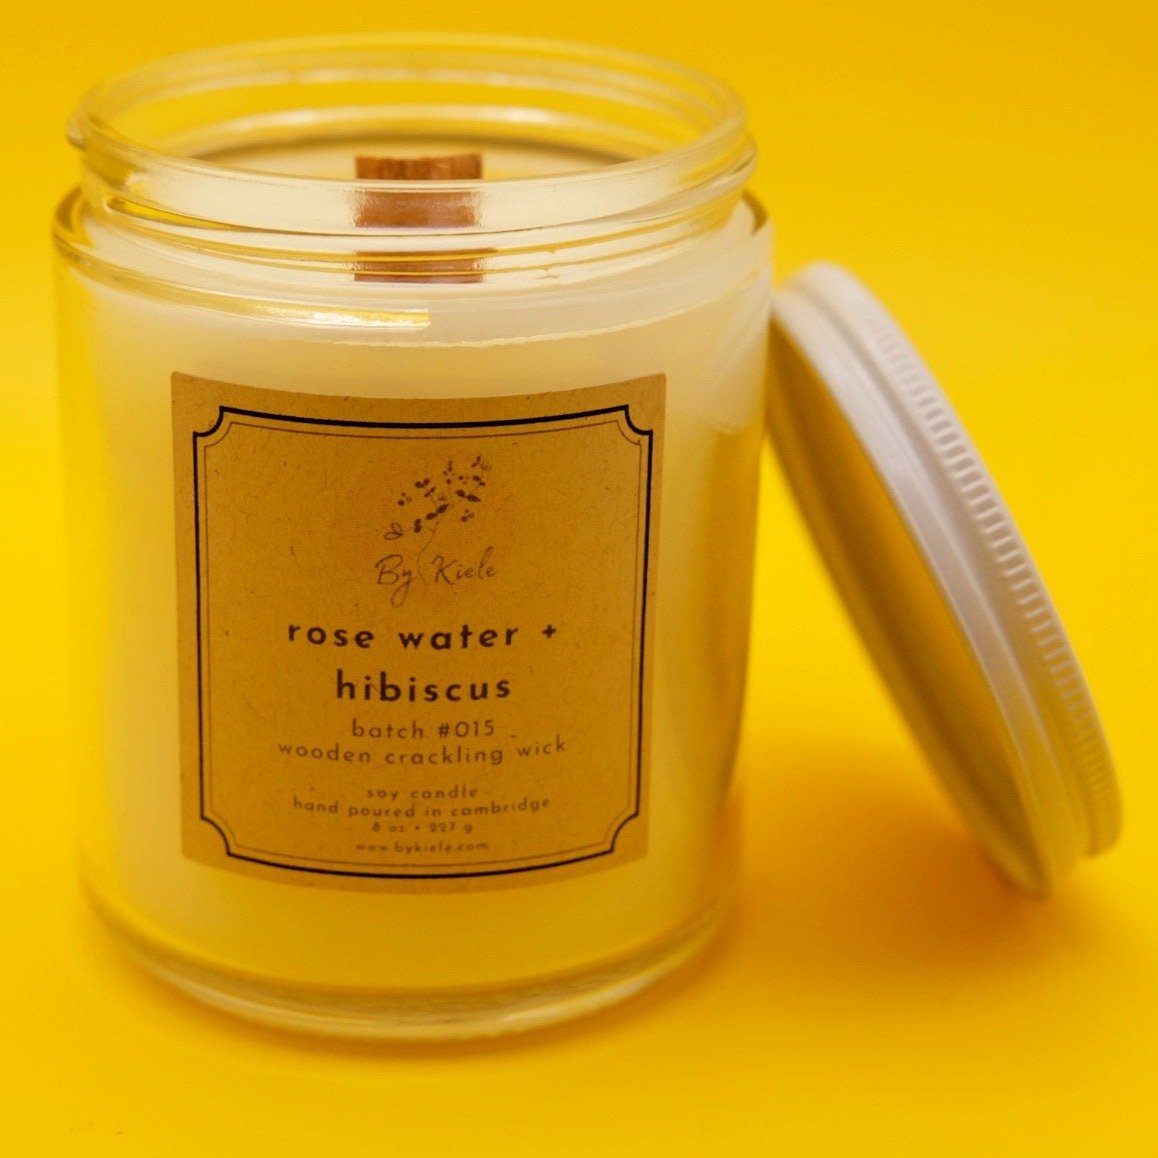 rose water + hibiscus candle - rose water + hibiscus candle - by kiele